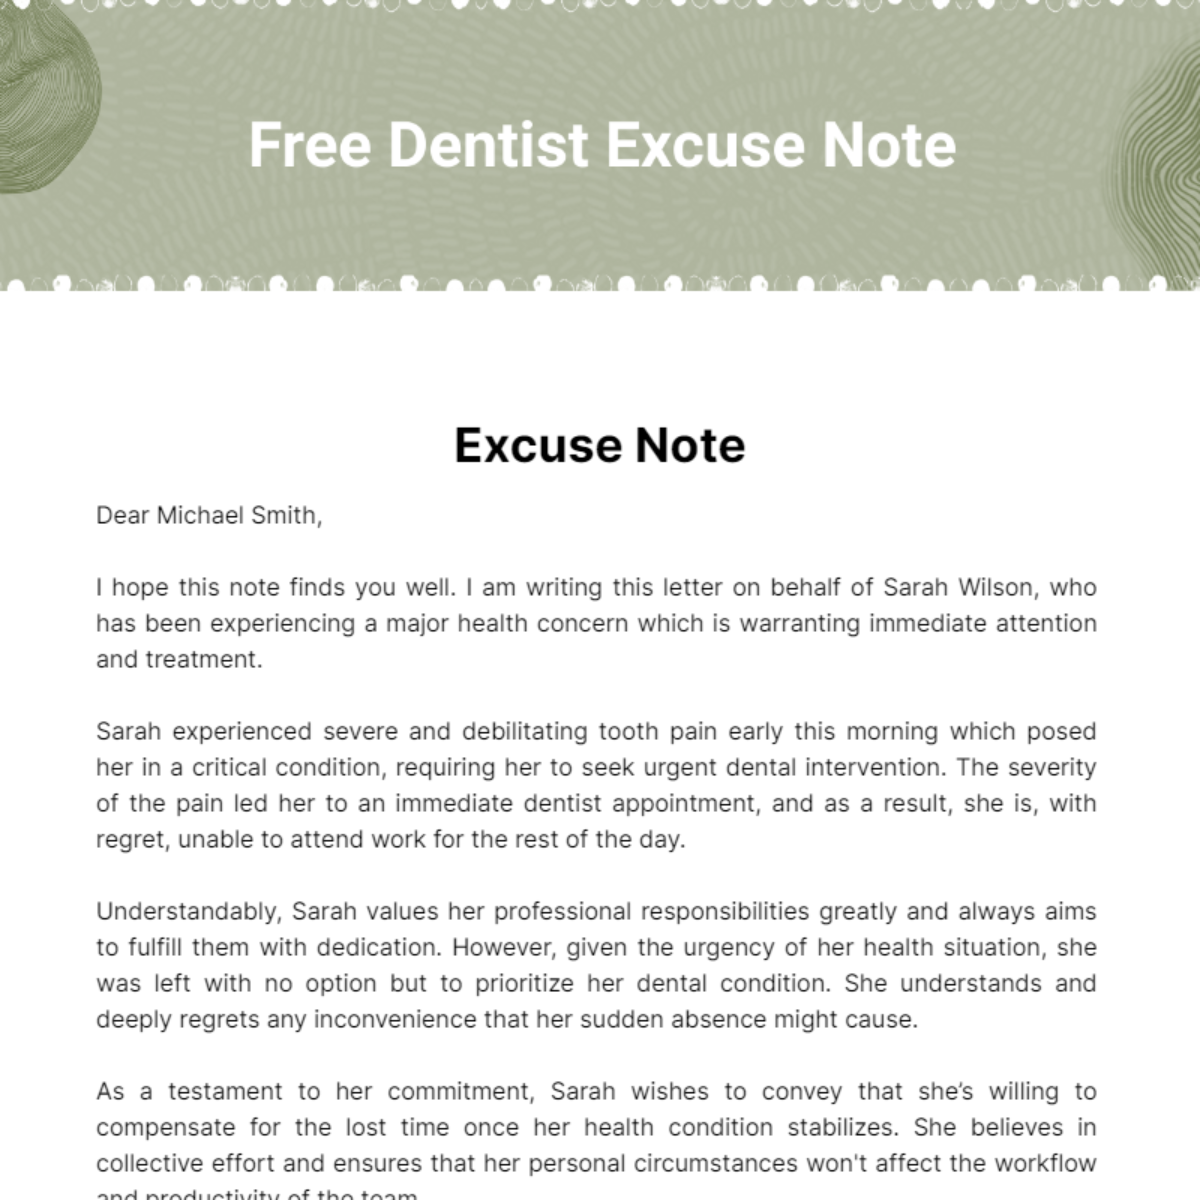 Free Dentist Excuse Note Template